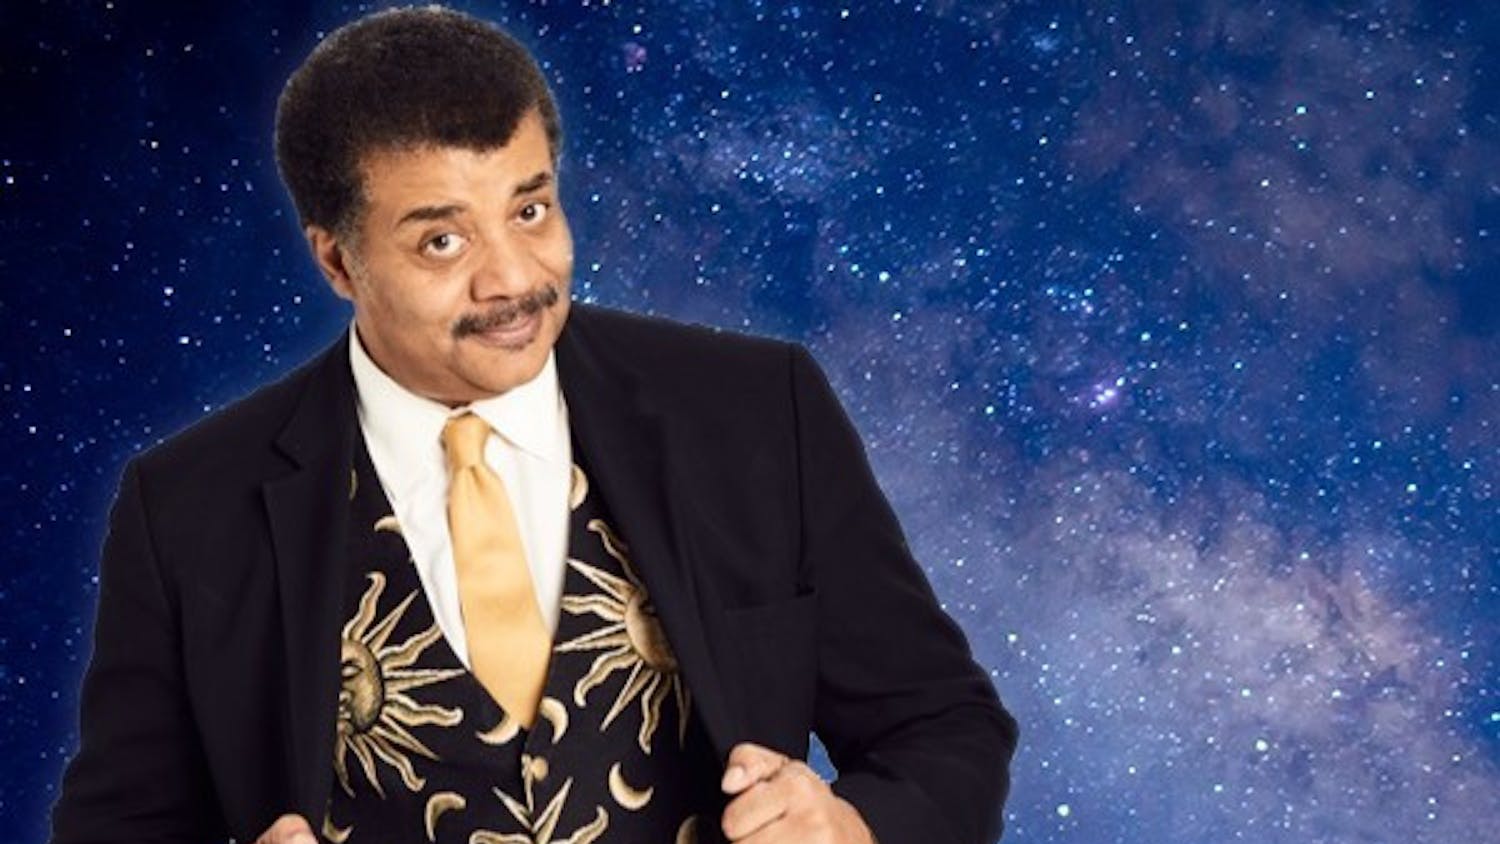 A flyer of famous astrophysicist Neil Degrasse Tyson. Tyson's 2023 tour comes to the Koger Center on Wednesday where he will share his knowledge on recent scientific discoveries.